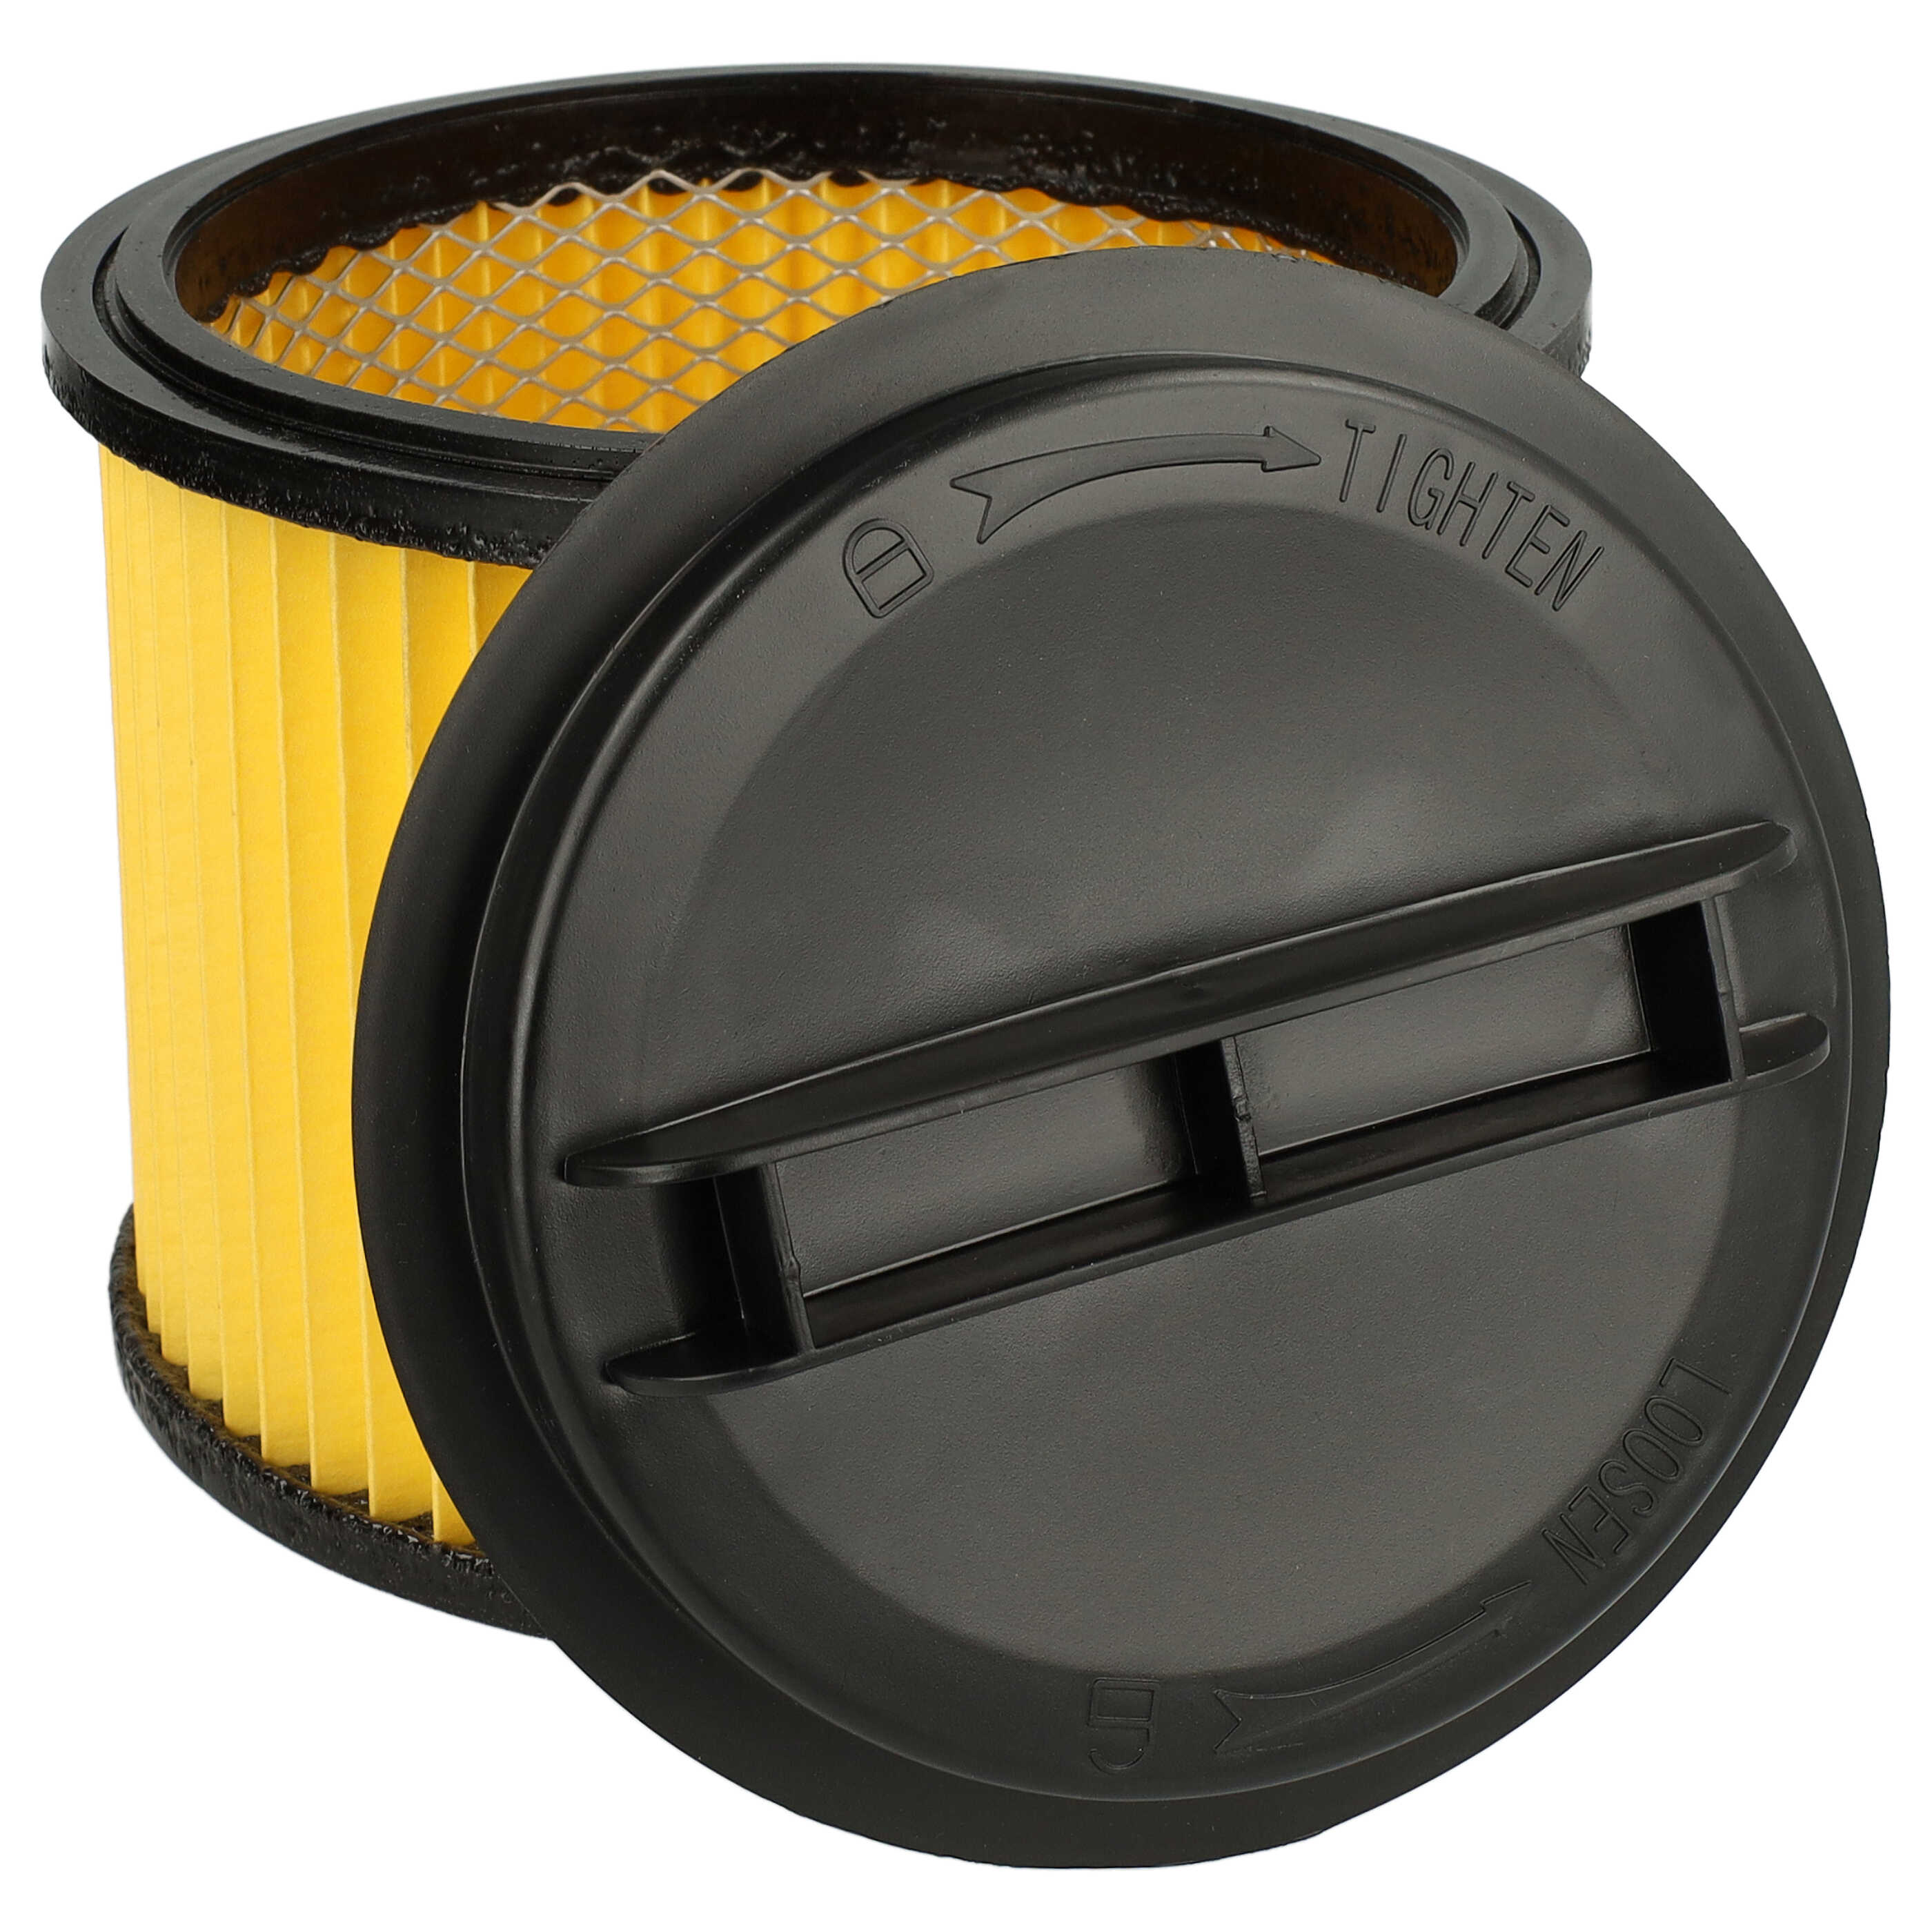 1x cartridge filter replaces Einhell 23.421.75, 23.421.67 for Einhell Vacuum Cleaner, yellow / black